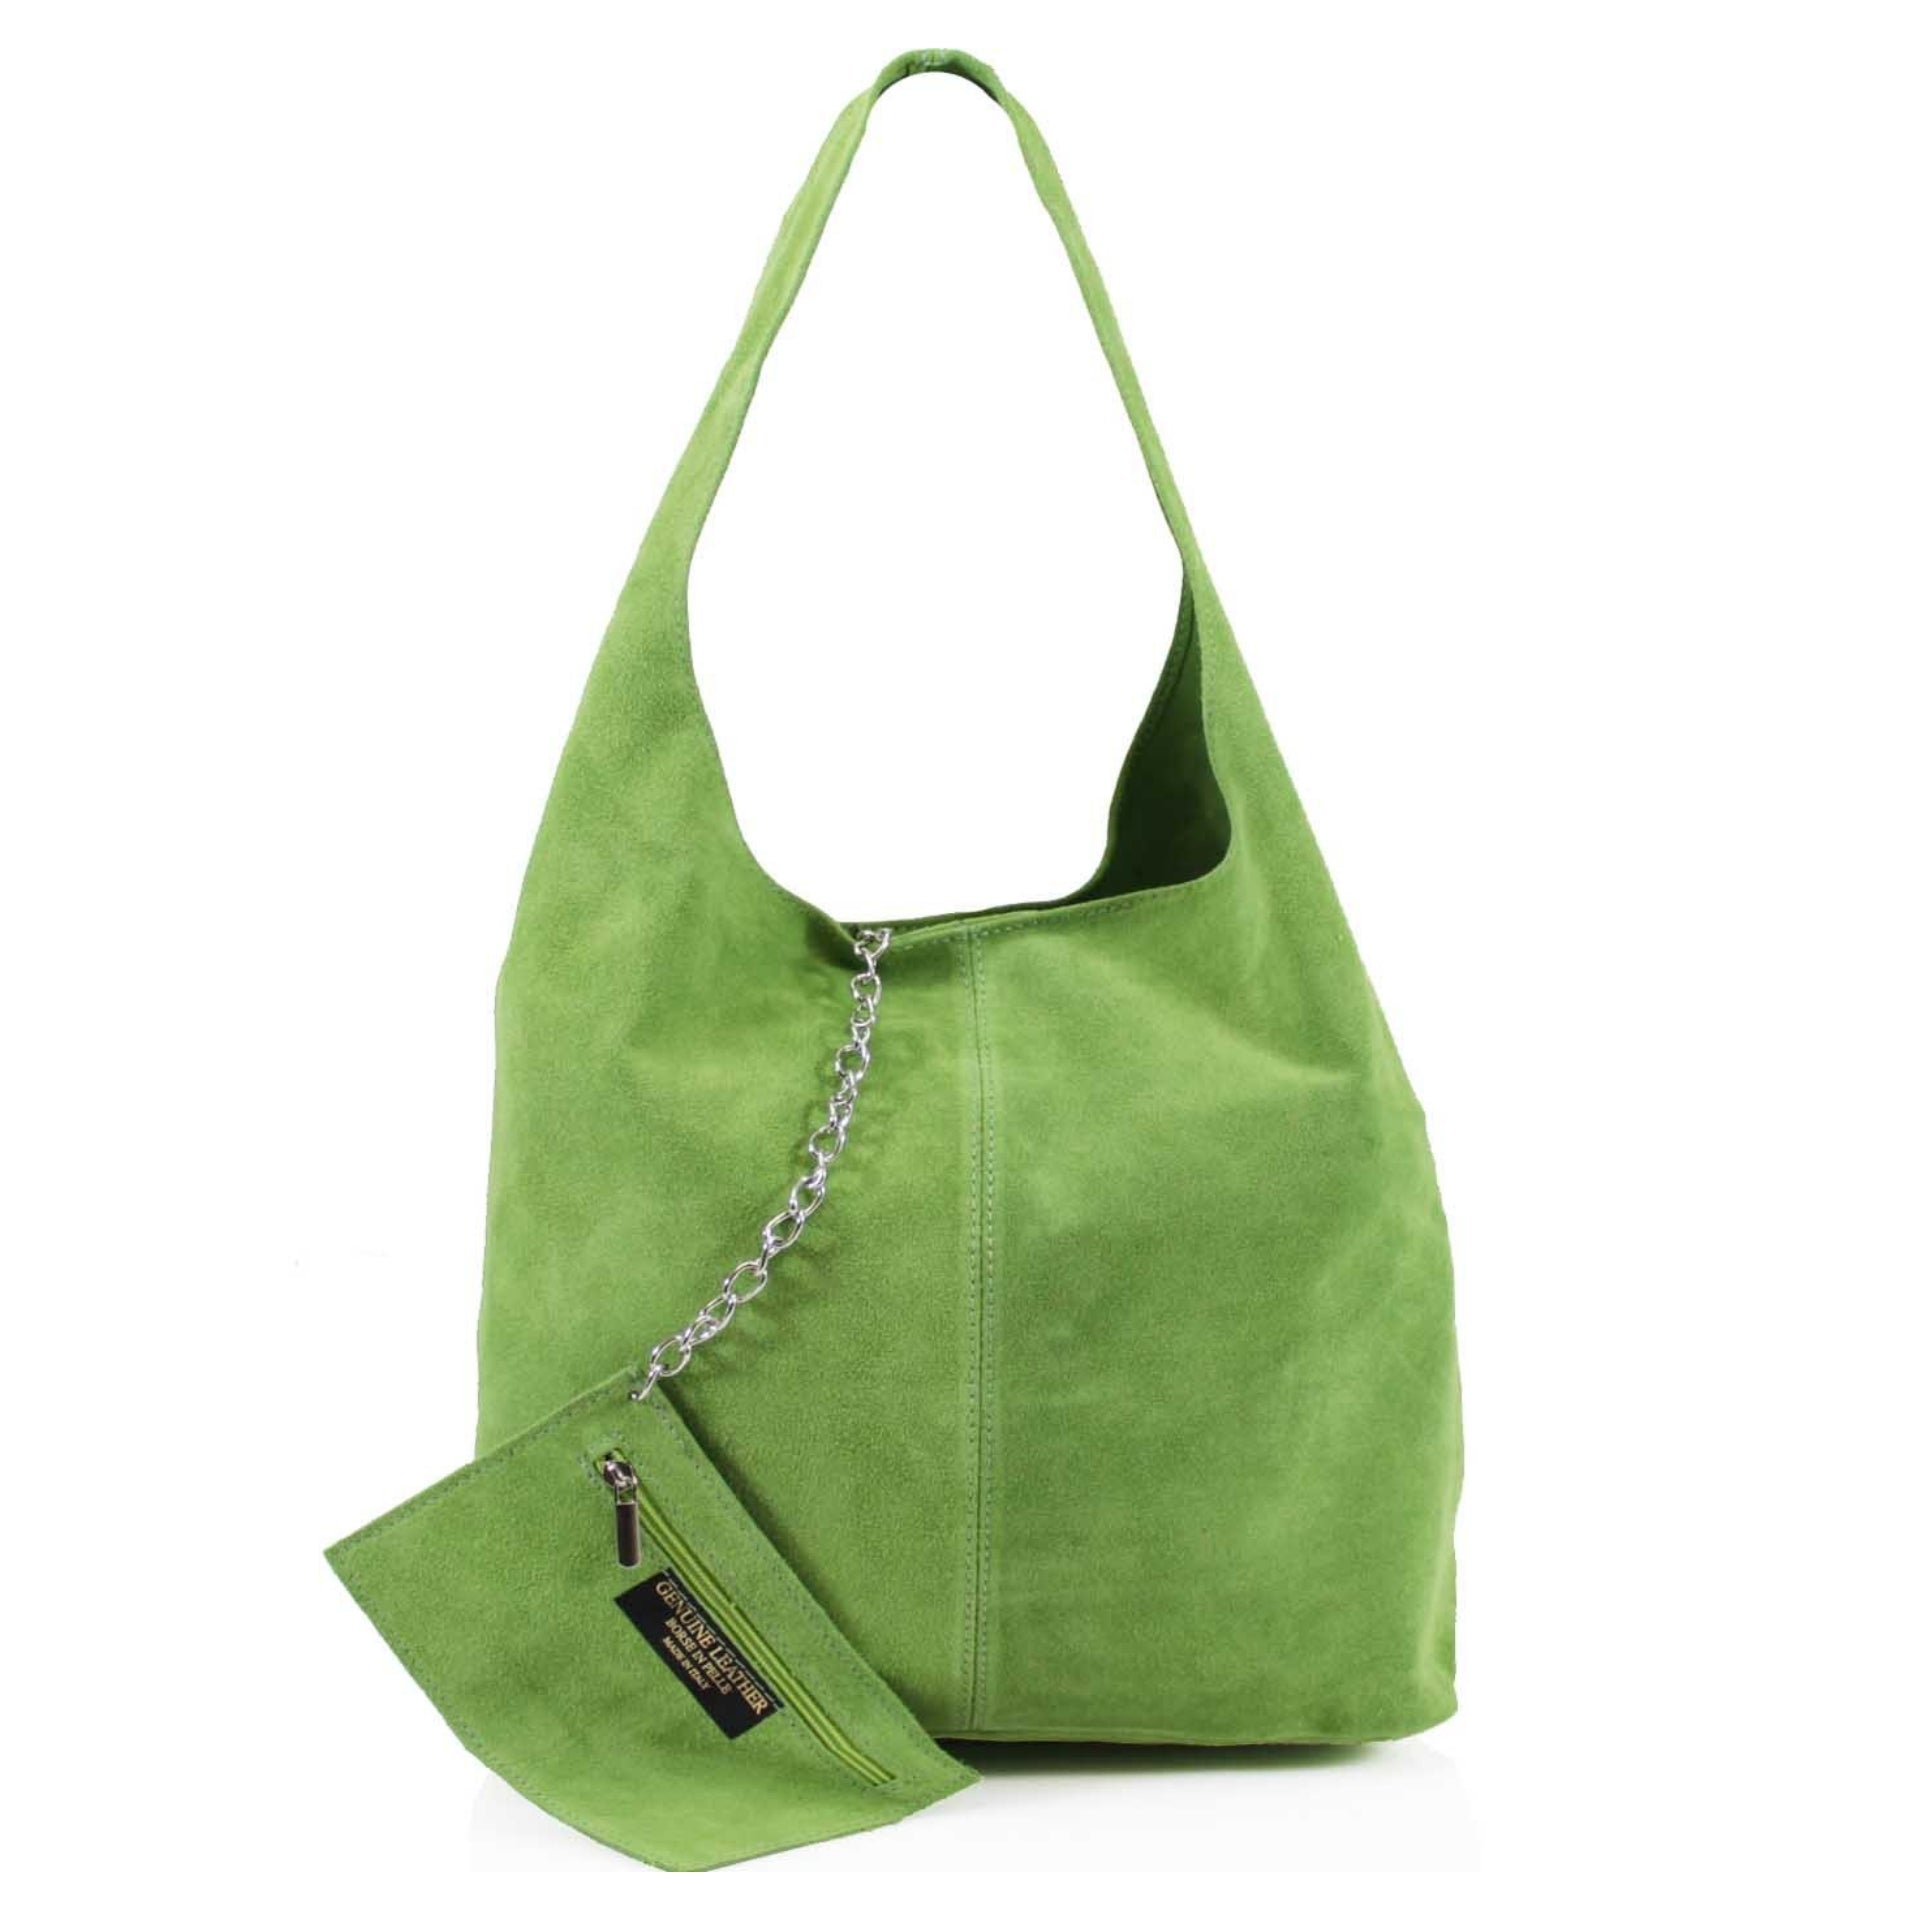 Expandable Genuine Italian Suede Leather Hobo Shoulder Bag